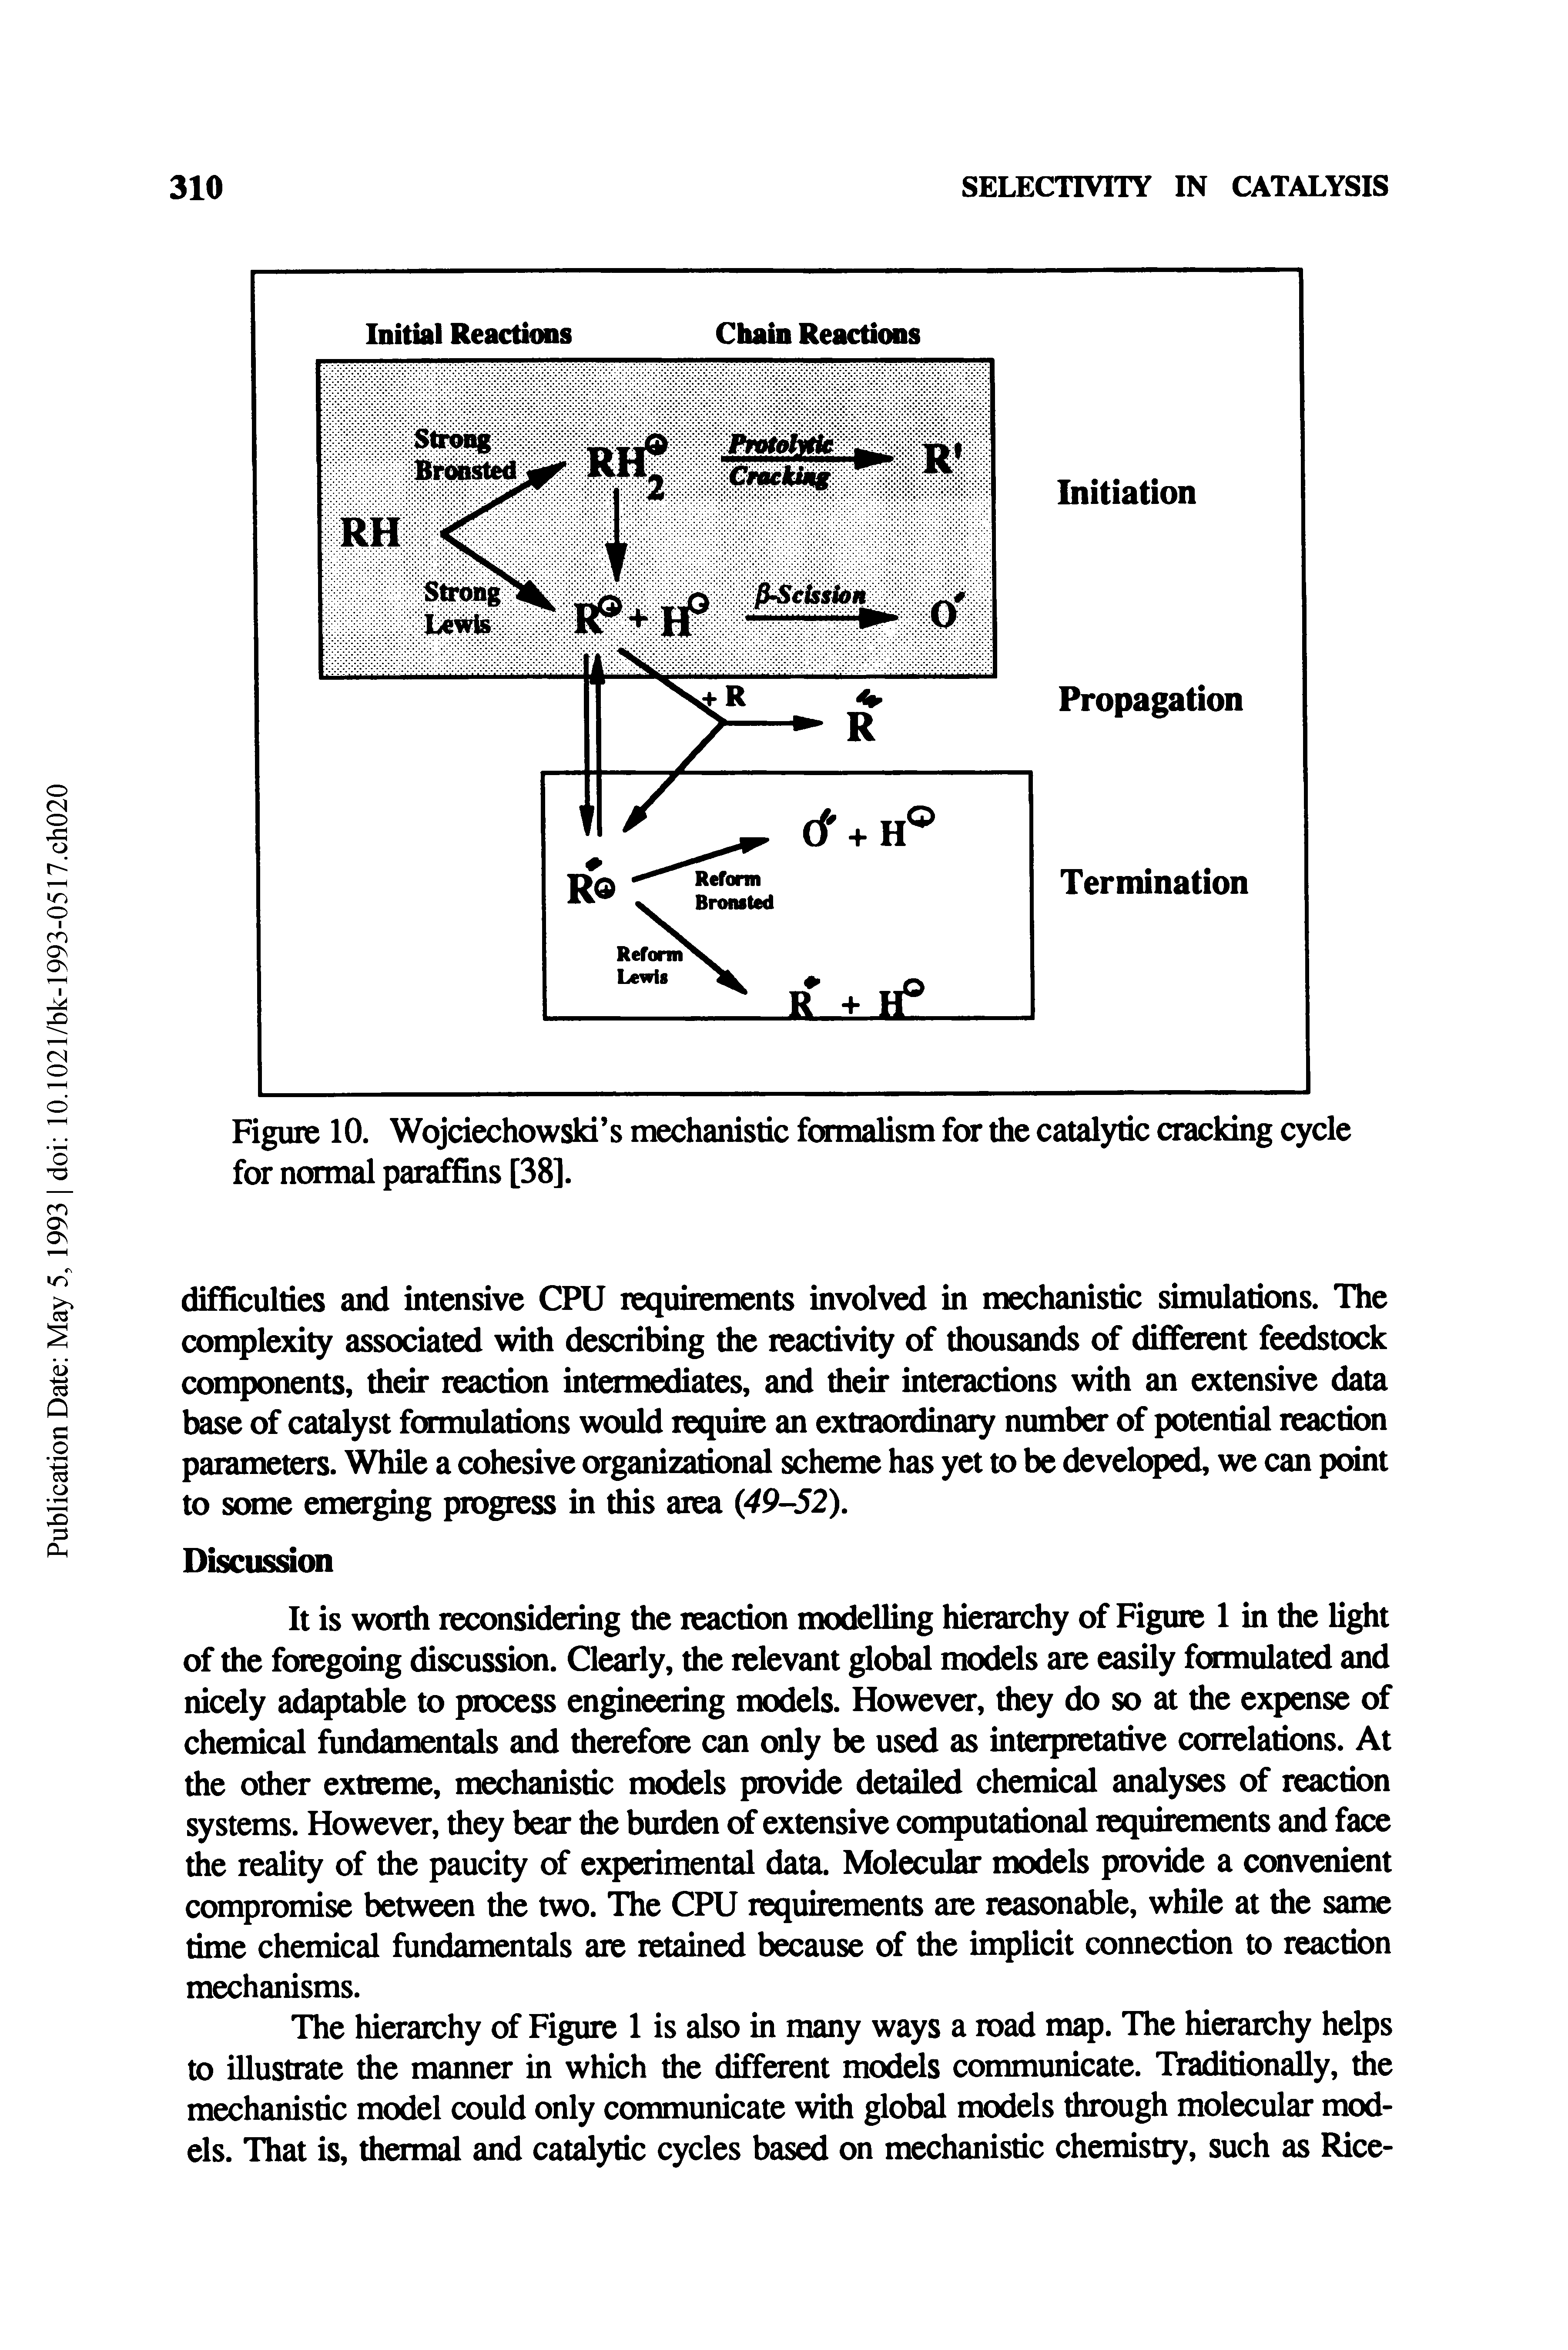 Figure 10. Wojciechowski s mechanistic formalism for the catalytic cracking cycle for normal paraffins [38].